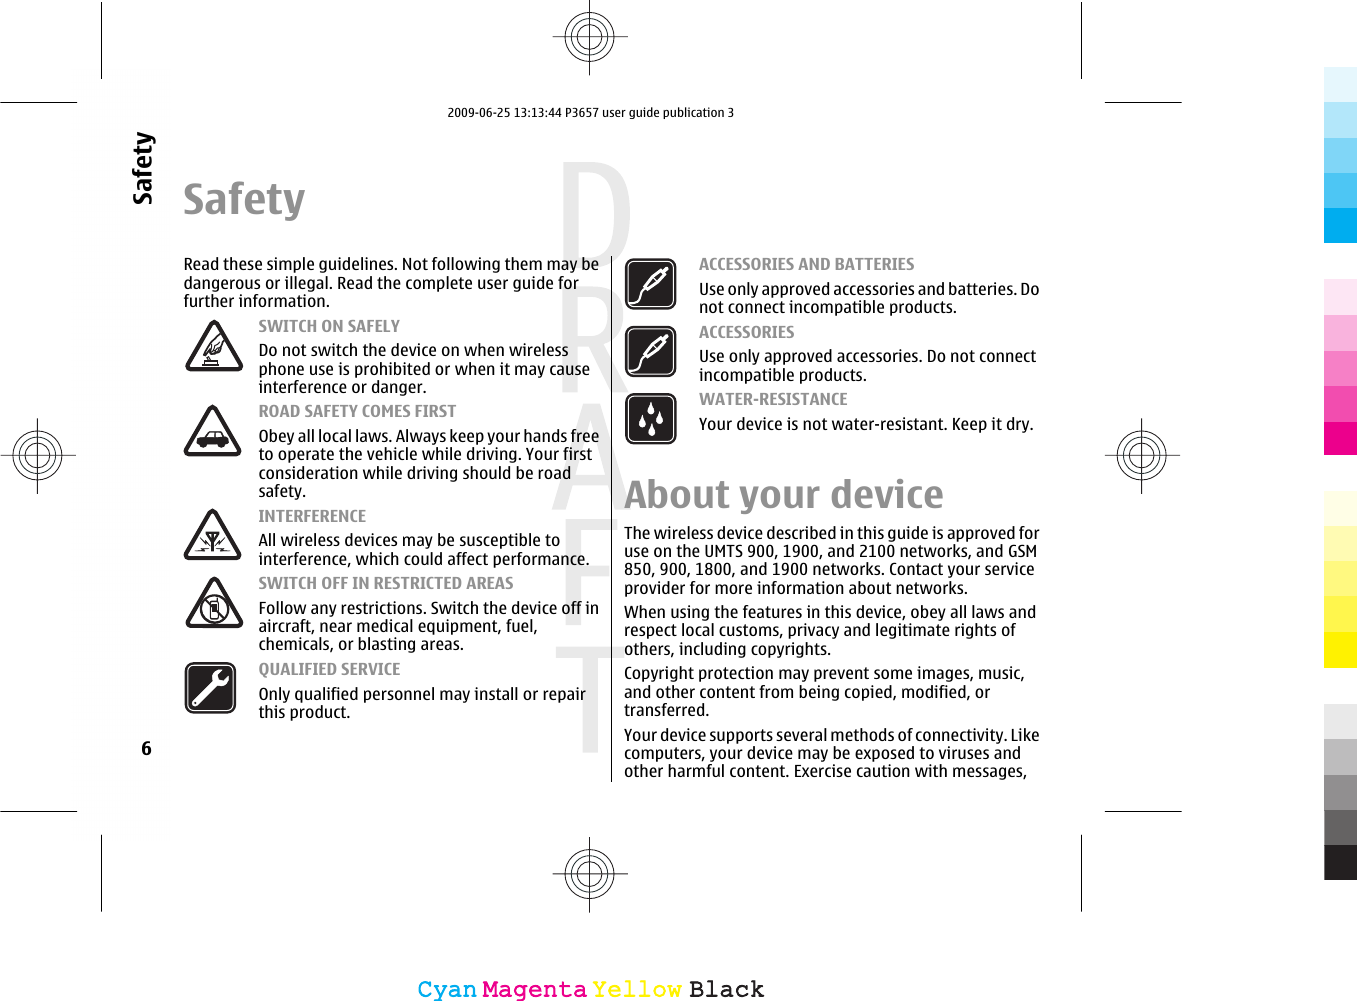 SafetyRead these simple guidelines. Not following them may bedangerous or illegal. Read the complete user guide forfurther information.SWITCH ON SAFELYDo not switch the device on when wirelessphone use is prohibited or when it may causeinterference or danger.ROAD SAFETY COMES FIRSTObey all local laws. Always keep your hands freeto operate the vehicle while driving. Your firstconsideration while driving should be roadsafety.INTERFERENCEAll wireless devices may be susceptible tointerference, which could affect performance.SWITCH OFF IN RESTRICTED AREASFollow any restrictions. Switch the device off inaircraft, near medical equipment, fuel,chemicals, or blasting areas.QUALIFIED SERVICEOnly qualified personnel may install or repairthis product.ACCESSORIES AND BATTERIESUse only approved accessories and batteries. Donot connect incompatible products.ACCESSORIESUse only approved accessories. Do not connectincompatible products.WATER-RESISTANCEYour device is not water-resistant. Keep it dry.About your deviceThe wireless device described in this guide is approved foruse on the UMTS 900, 1900, and 2100 networks, and GSM850, 900, 1800, and 1900 networks. Contact your serviceprovider for more information about networks.When using the features in this device, obey all laws andrespect local customs, privacy and legitimate rights ofothers, including copyrights.Copyright protection may prevent some images, music,and other content from being copied, modified, ortransferred.Your device supports several methods of connectivity. Likecomputers, your device may be exposed to viruses andother harmful content. Exercise caution with messages,6SafetyCyanCyanMagentaMagentaYellowYellowBlackBlack2009-06-25 13:13:44 P3657 user guide publication 3